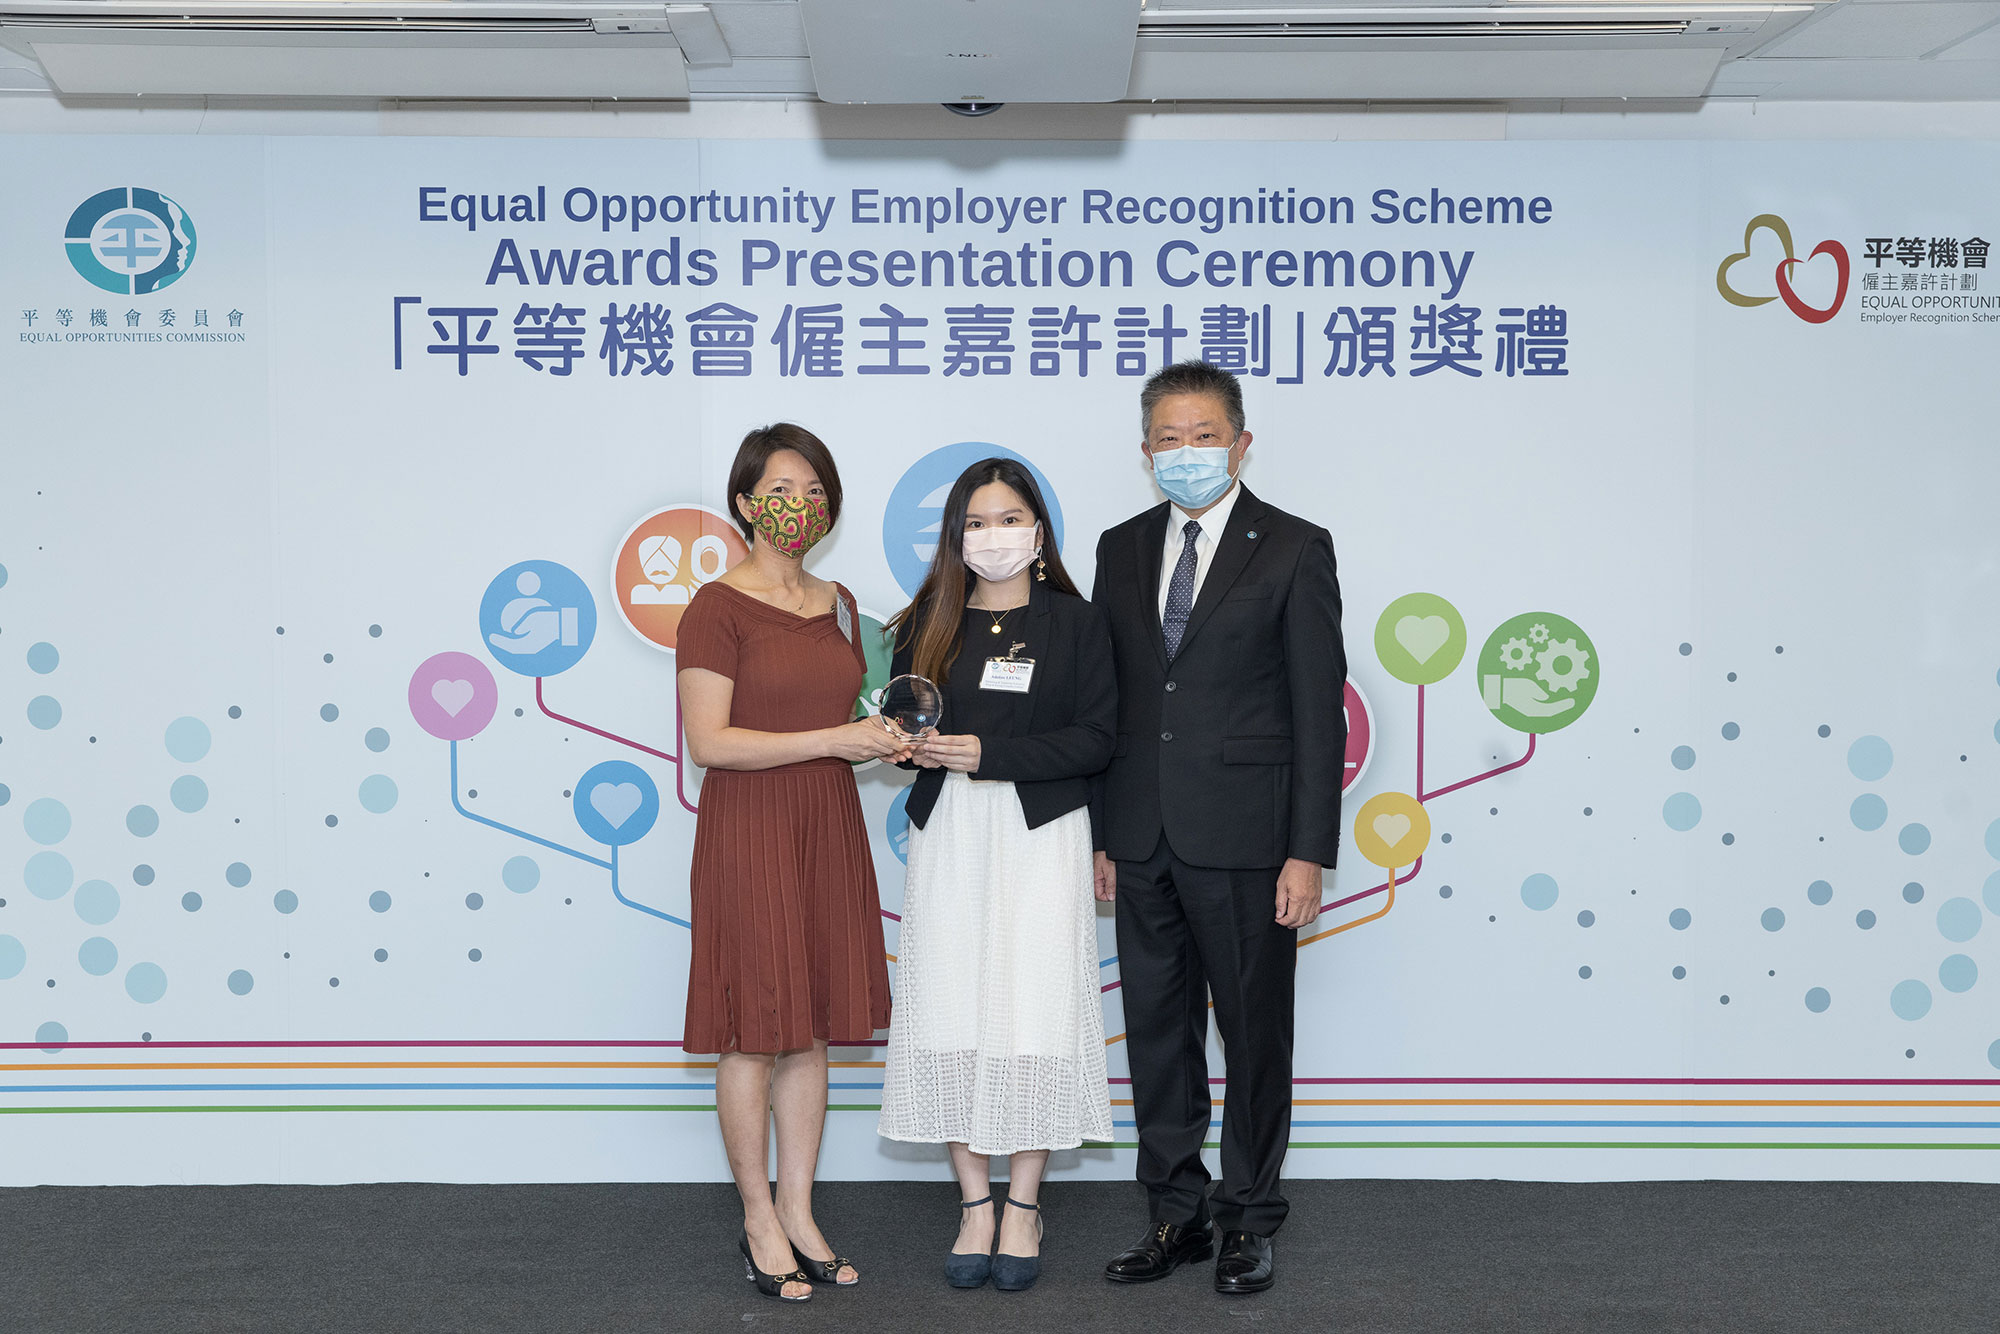 Mr Ricky CHU Man-kin, IDS, Chairperson of the Equal Opportunities Commission (right) and Prof Susanne CHOI, EOC Member and Former Convenor of the Policy, Research and Training Committee (left), present the trophy to the representative of Wing & Kwong Company Limited (centre), winner of the Outstanding SME Award of the Equal Opportunity Employer Recognition Scheme. 